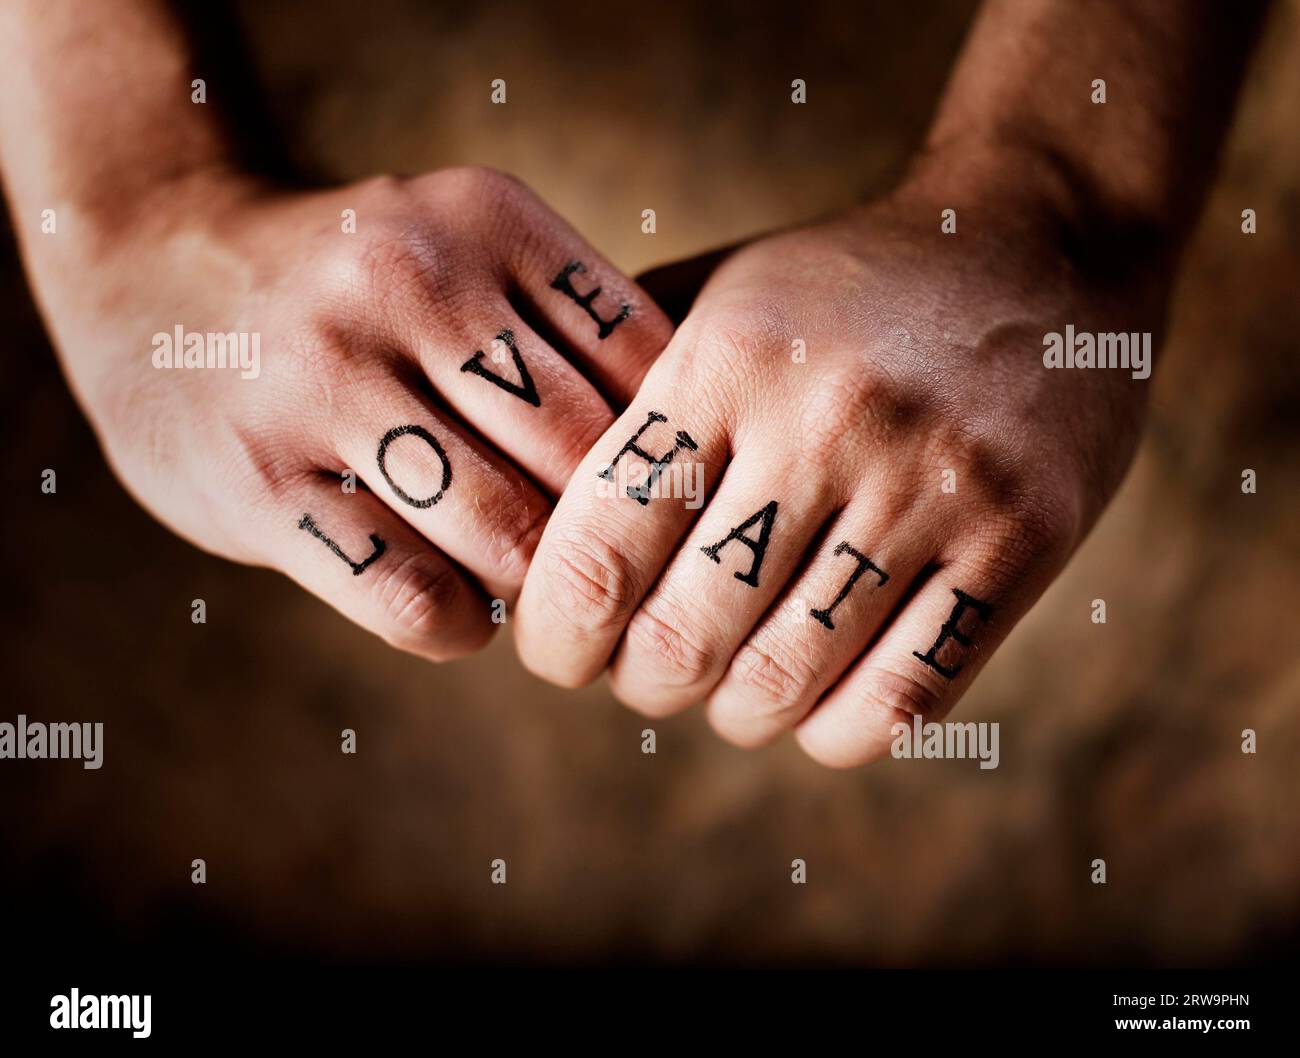 Man with (fake) Love and Hate knuckle tattoos Stock Photo